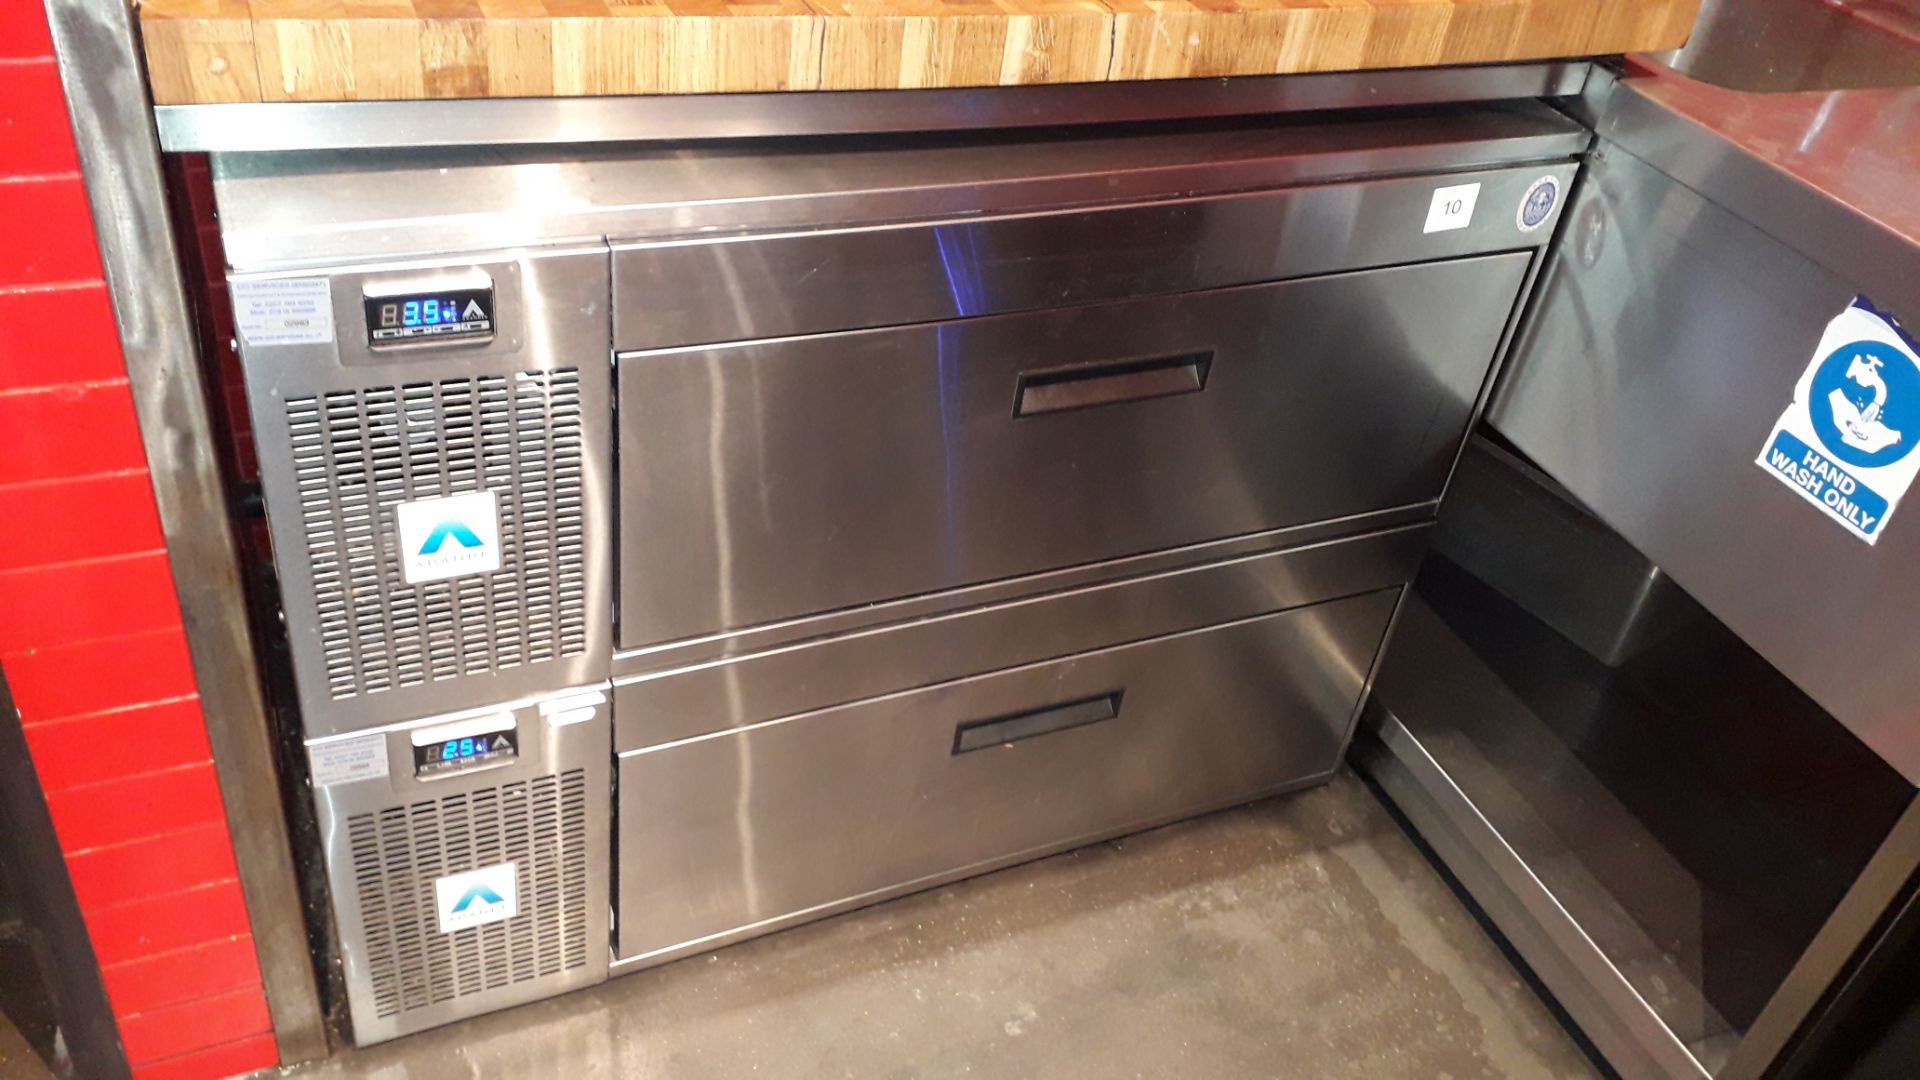 Adande stainless steel twin drawer under counter Refrigerator - Image 2 of 2